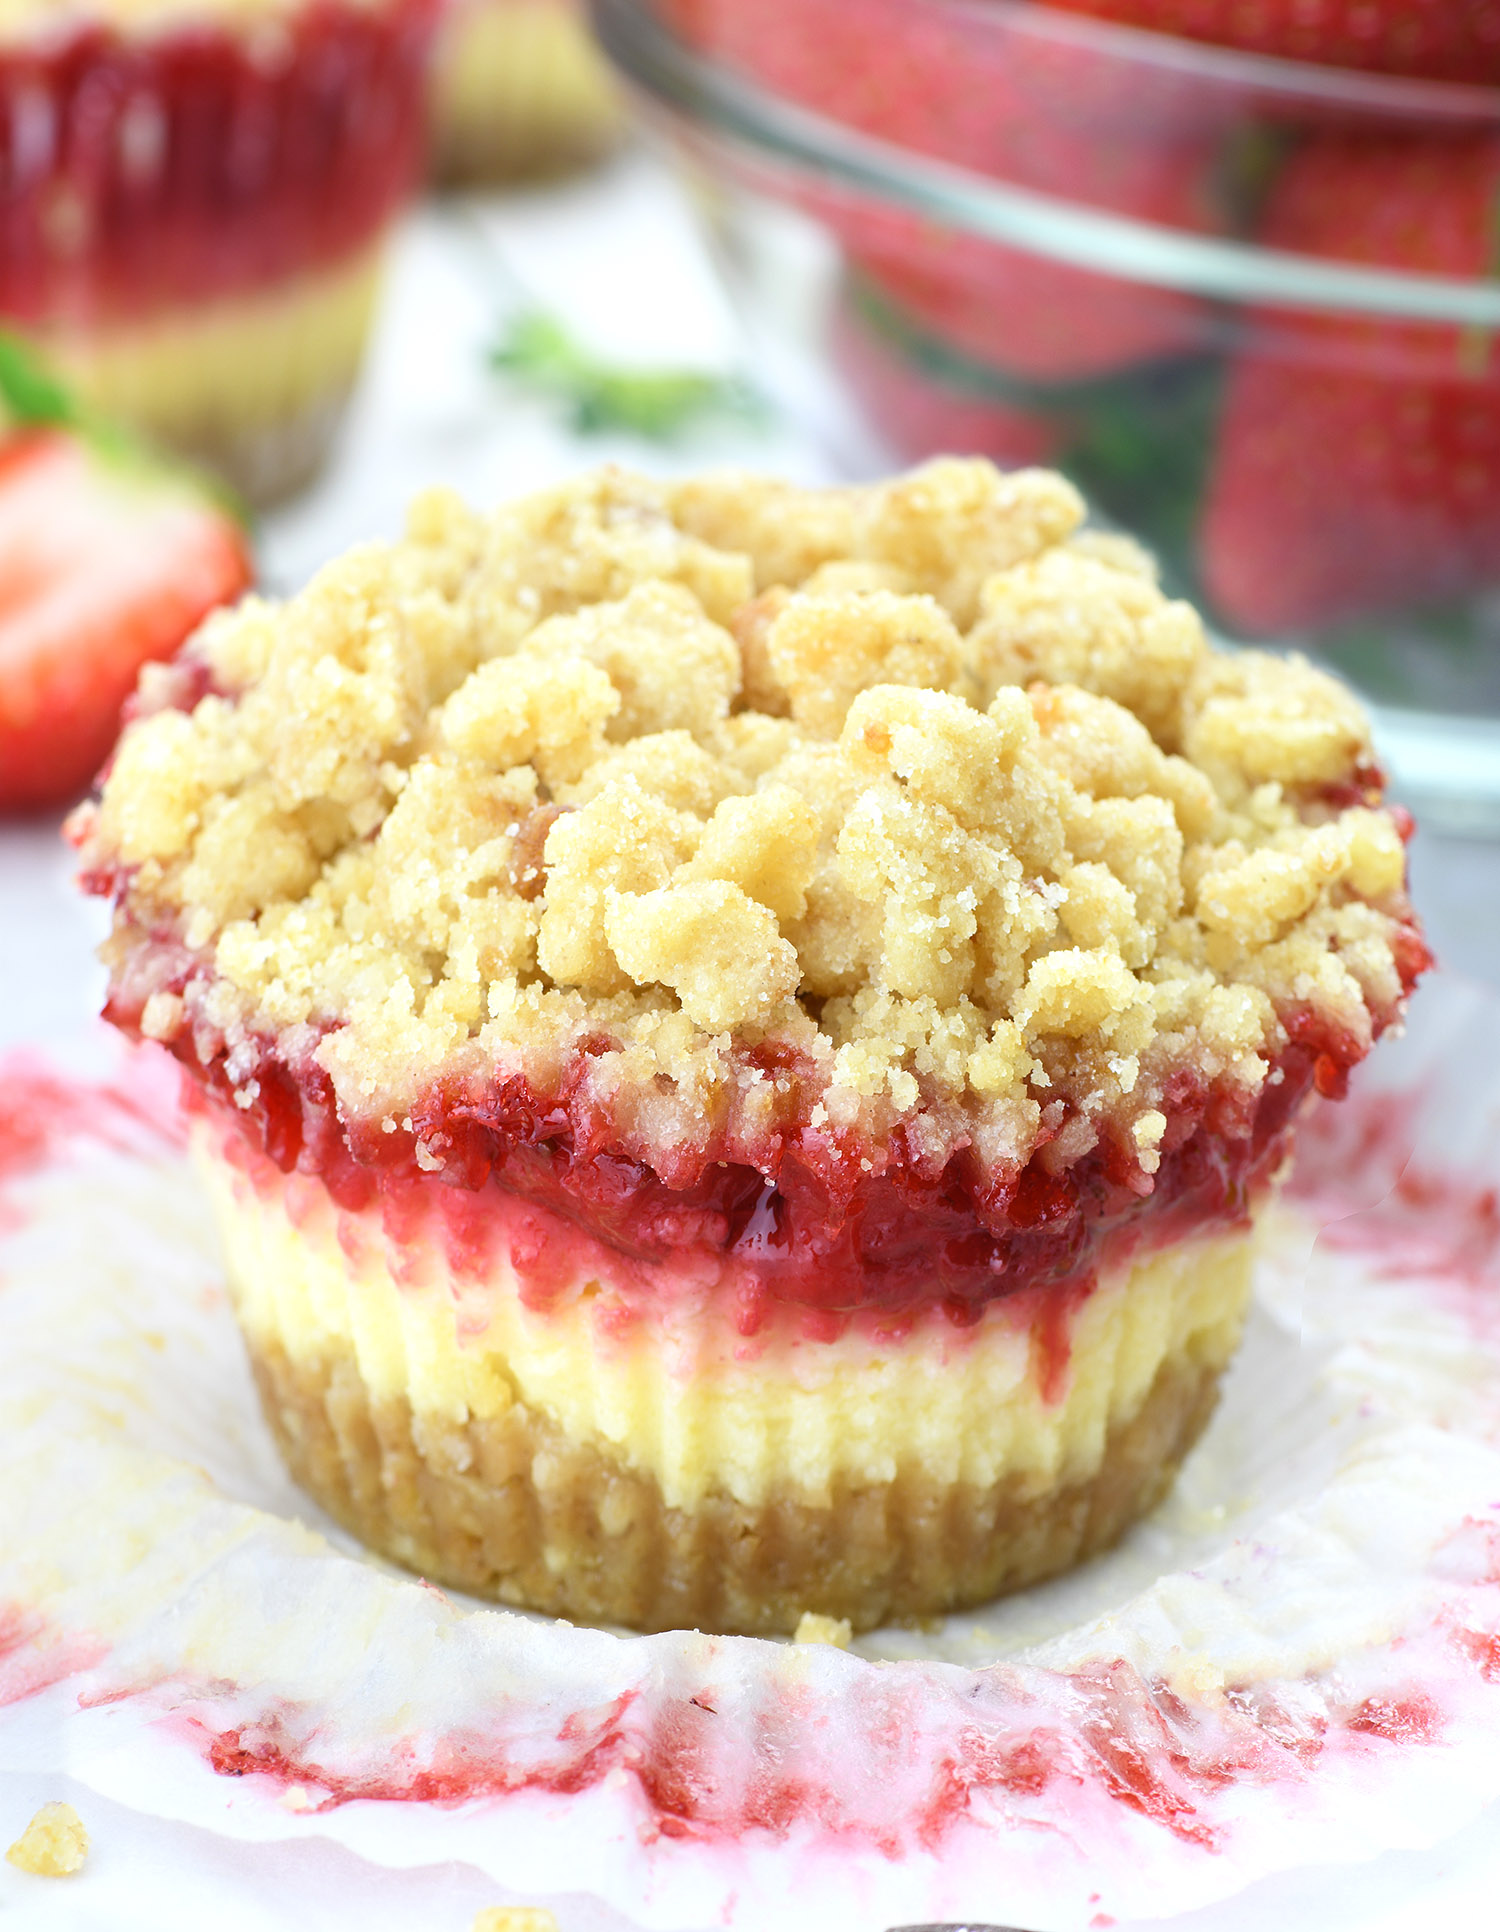 A close-up of a mini strawberry cheesecake with a crumble topping, presented on a piece of parchment paper. The cheesecake has a golden-brown crust at the base, a creamy white cheesecake layer in the middle, and a bright red strawberry layer on top, all covered with a generous amount of light golden crumble. 